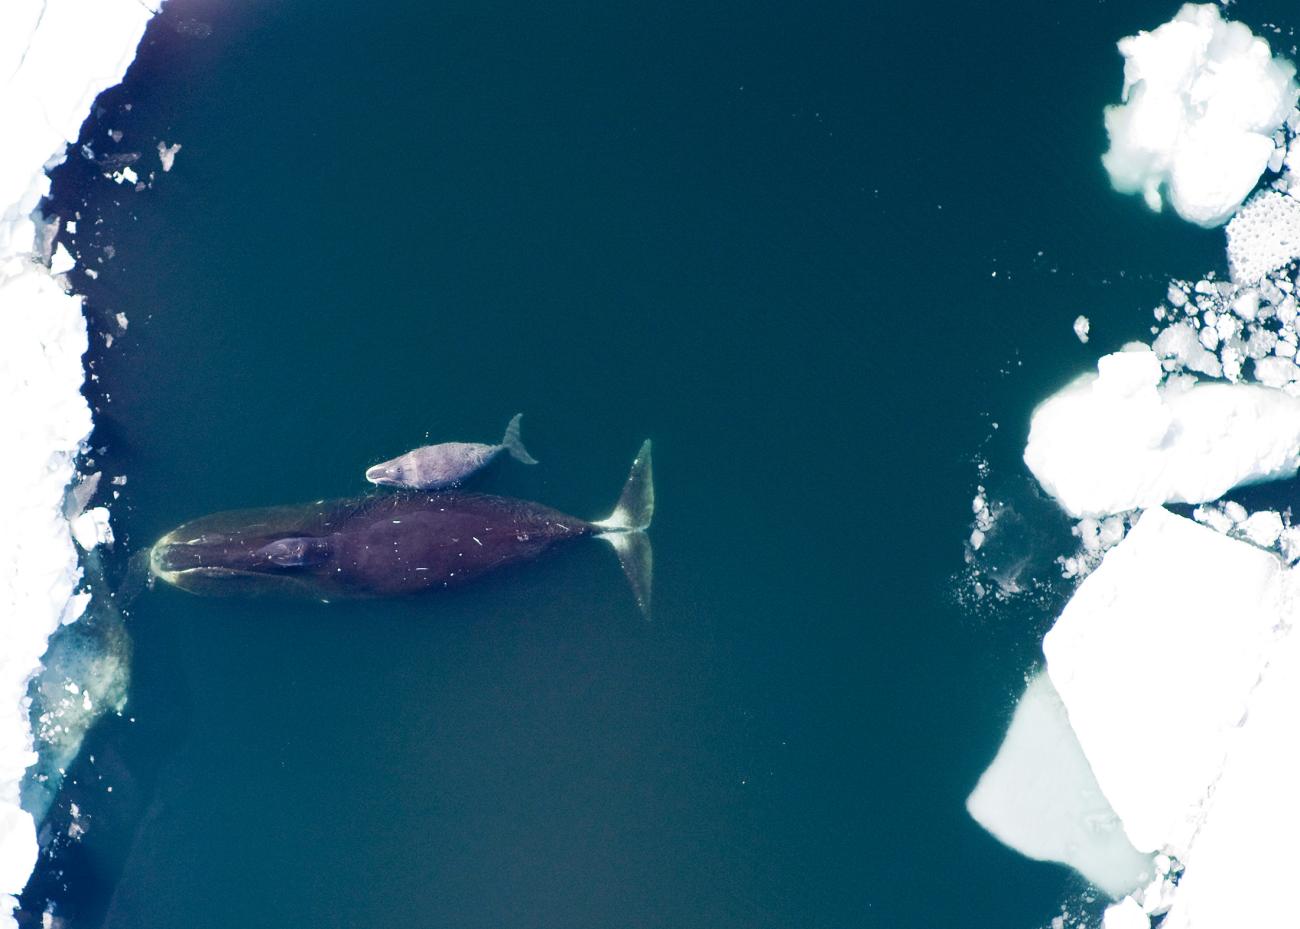 Bowhead whale and calf in the Arctic Ocean.